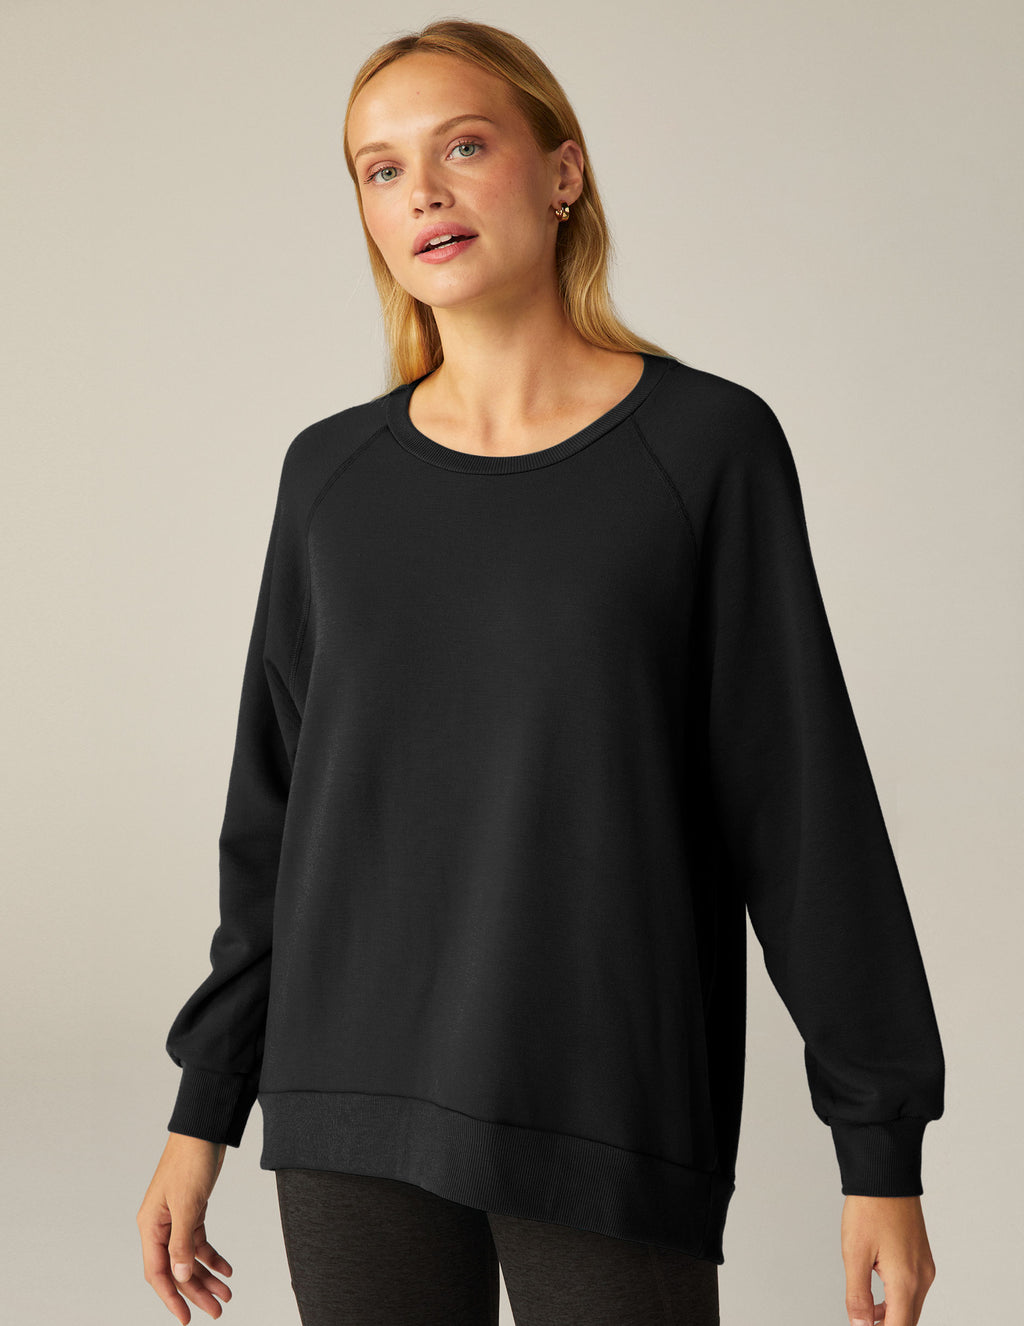 Saturday Oversized Pullover Featured Image